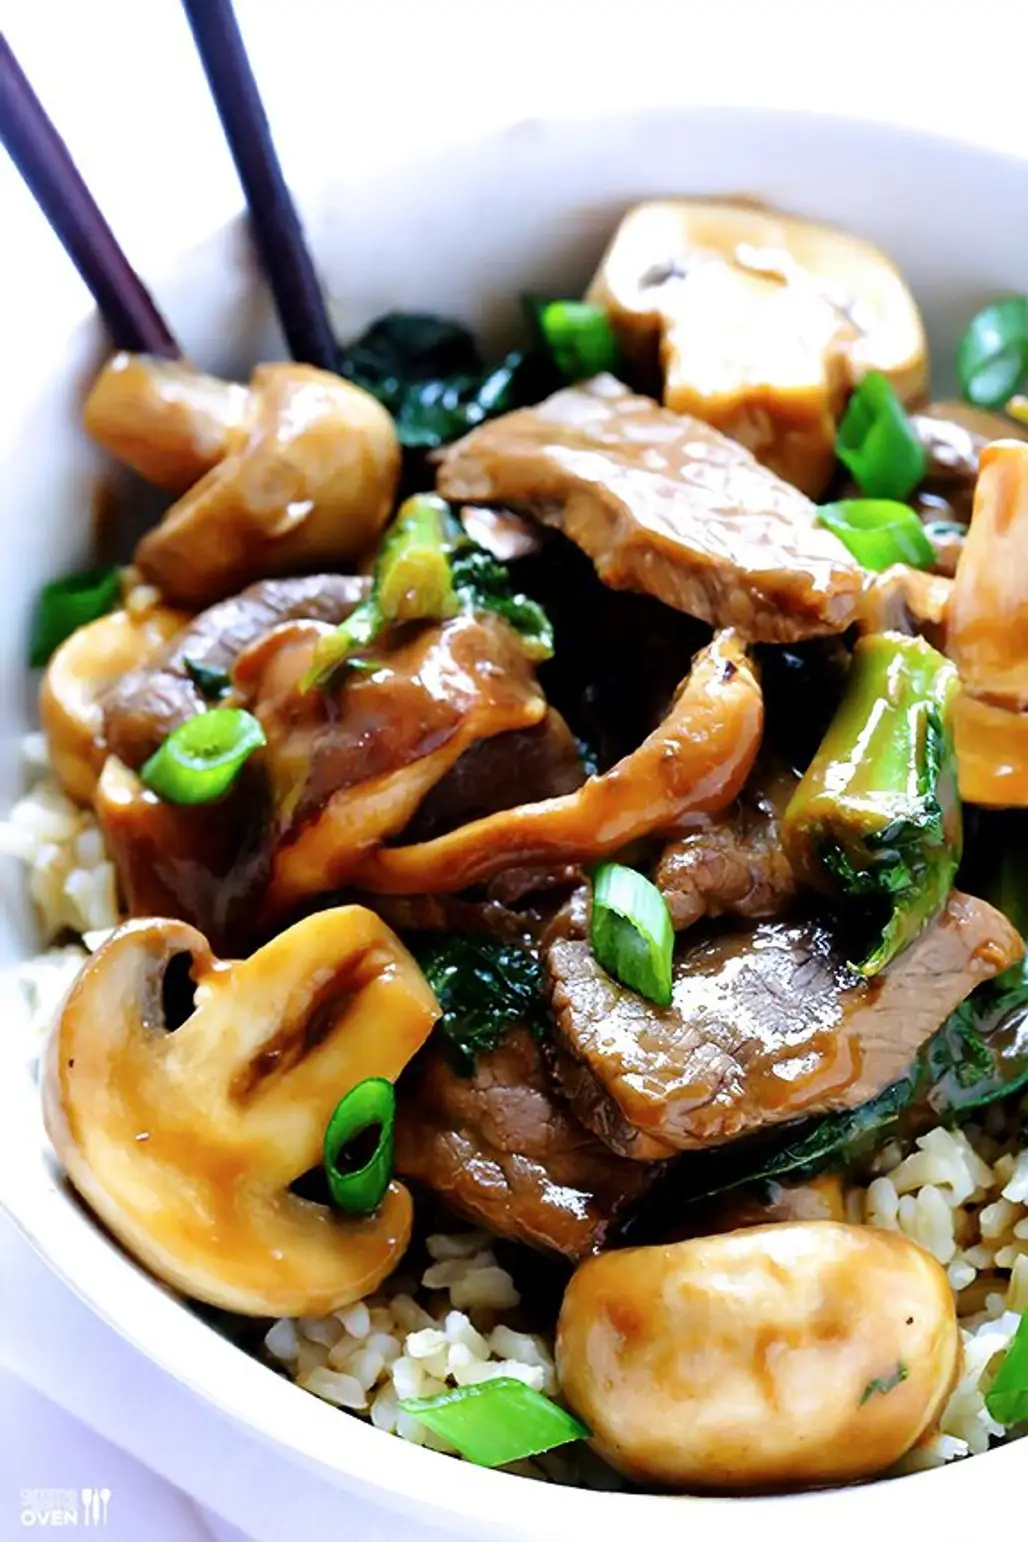 You Will Love Mushrooms in Your Stir-Fry